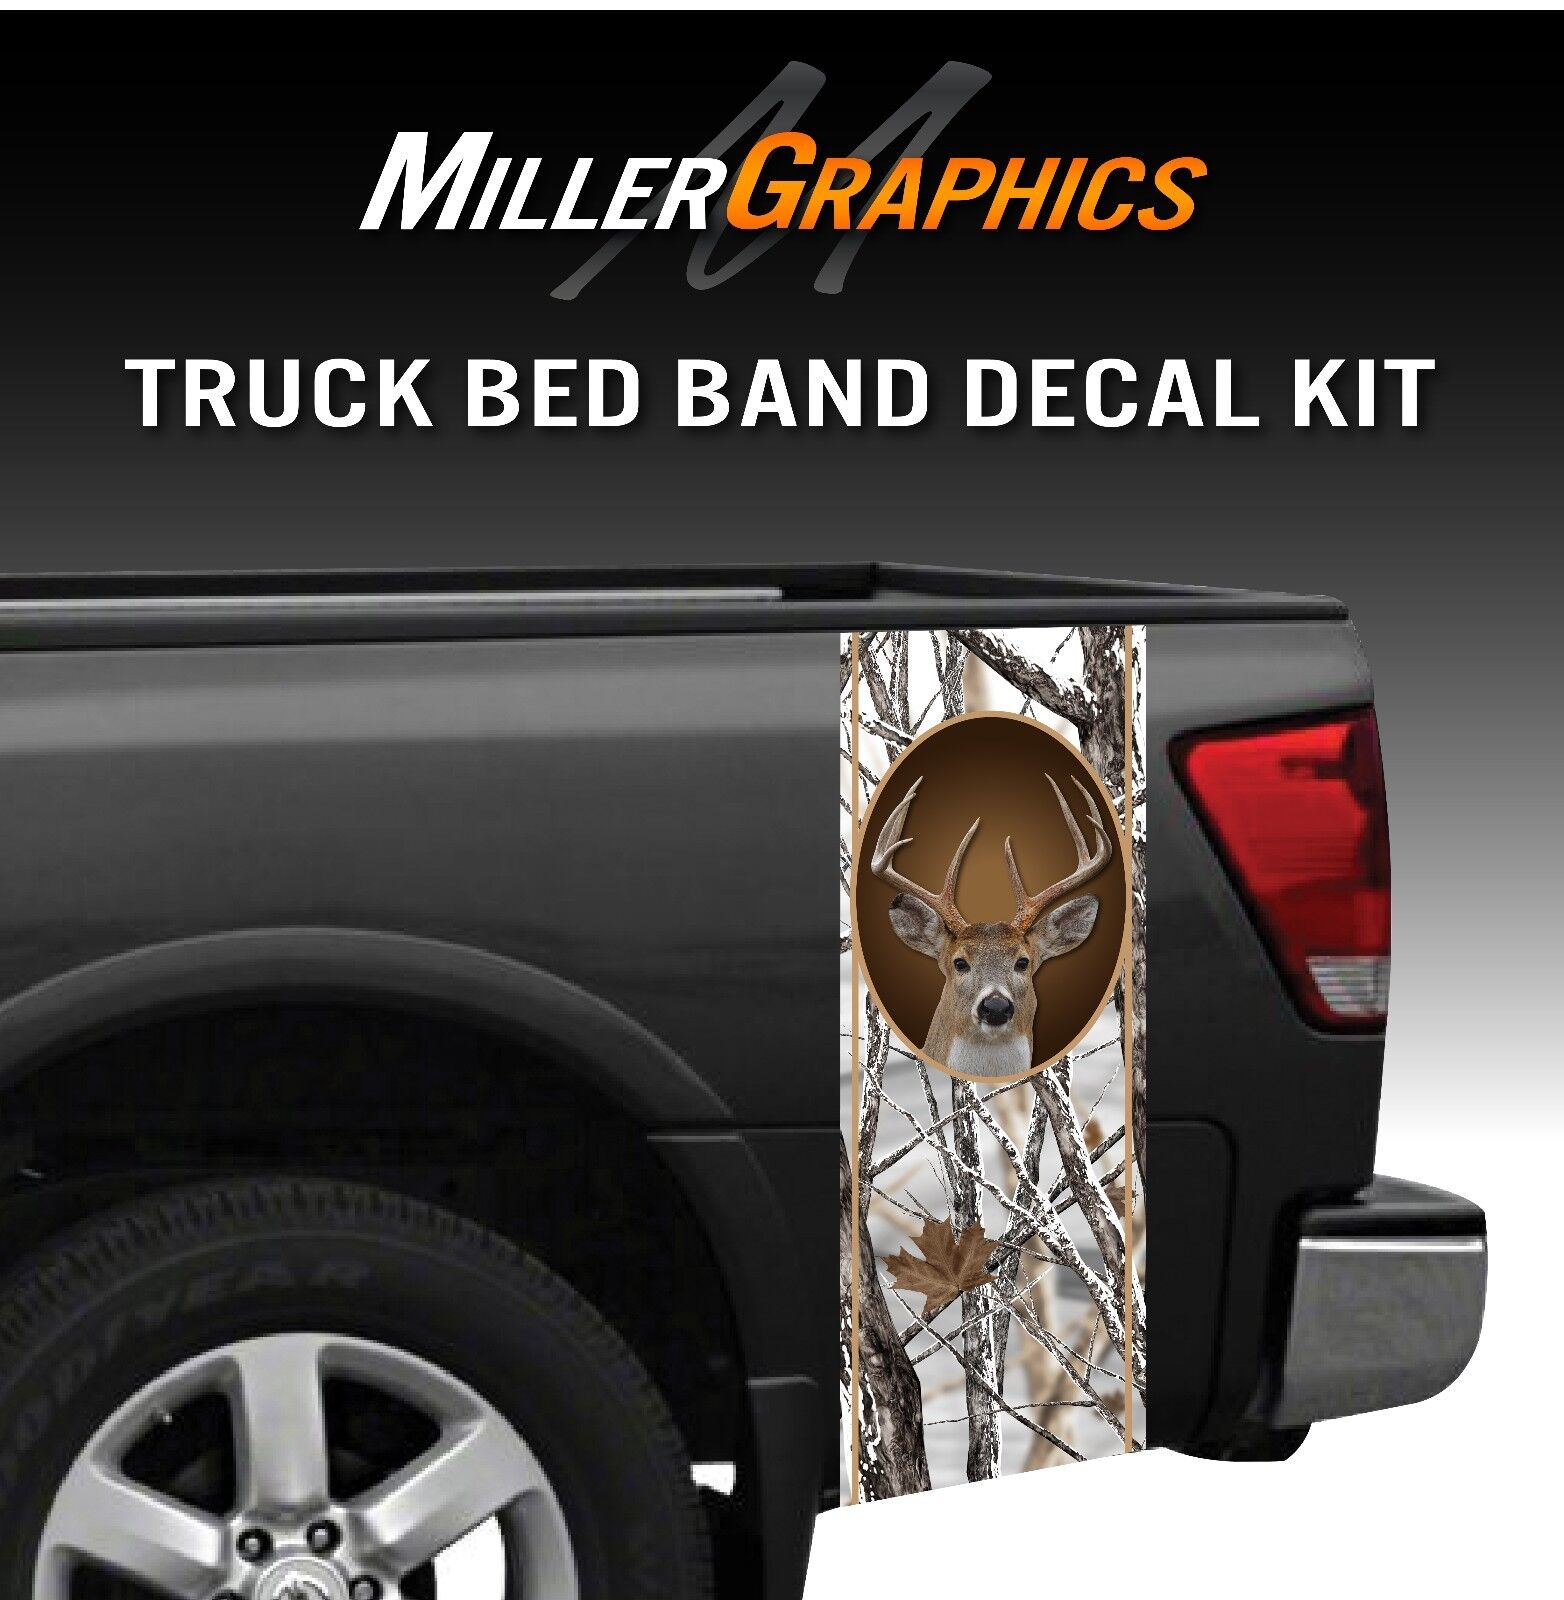 Whitetail Buck Deer /"Snowstorm/" Hunting Camo Truck Bed Band Decal Graphic